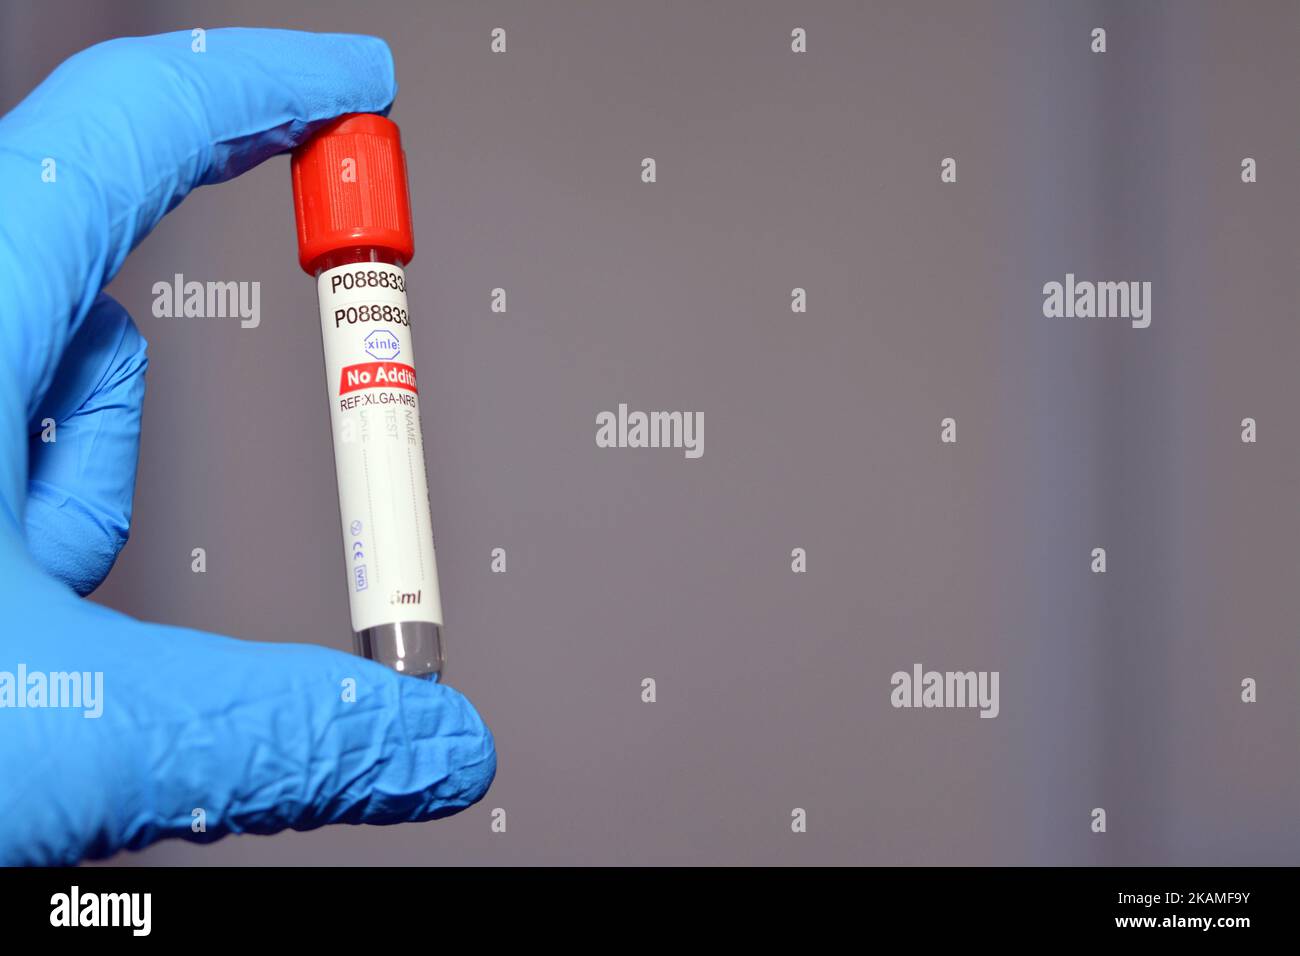 Cairo, Egypt, October 22 2022: Blood collection tube for collecting blood samples for laboratory analysis tests like CBC complete blood count, ESR, CR Stock Photo